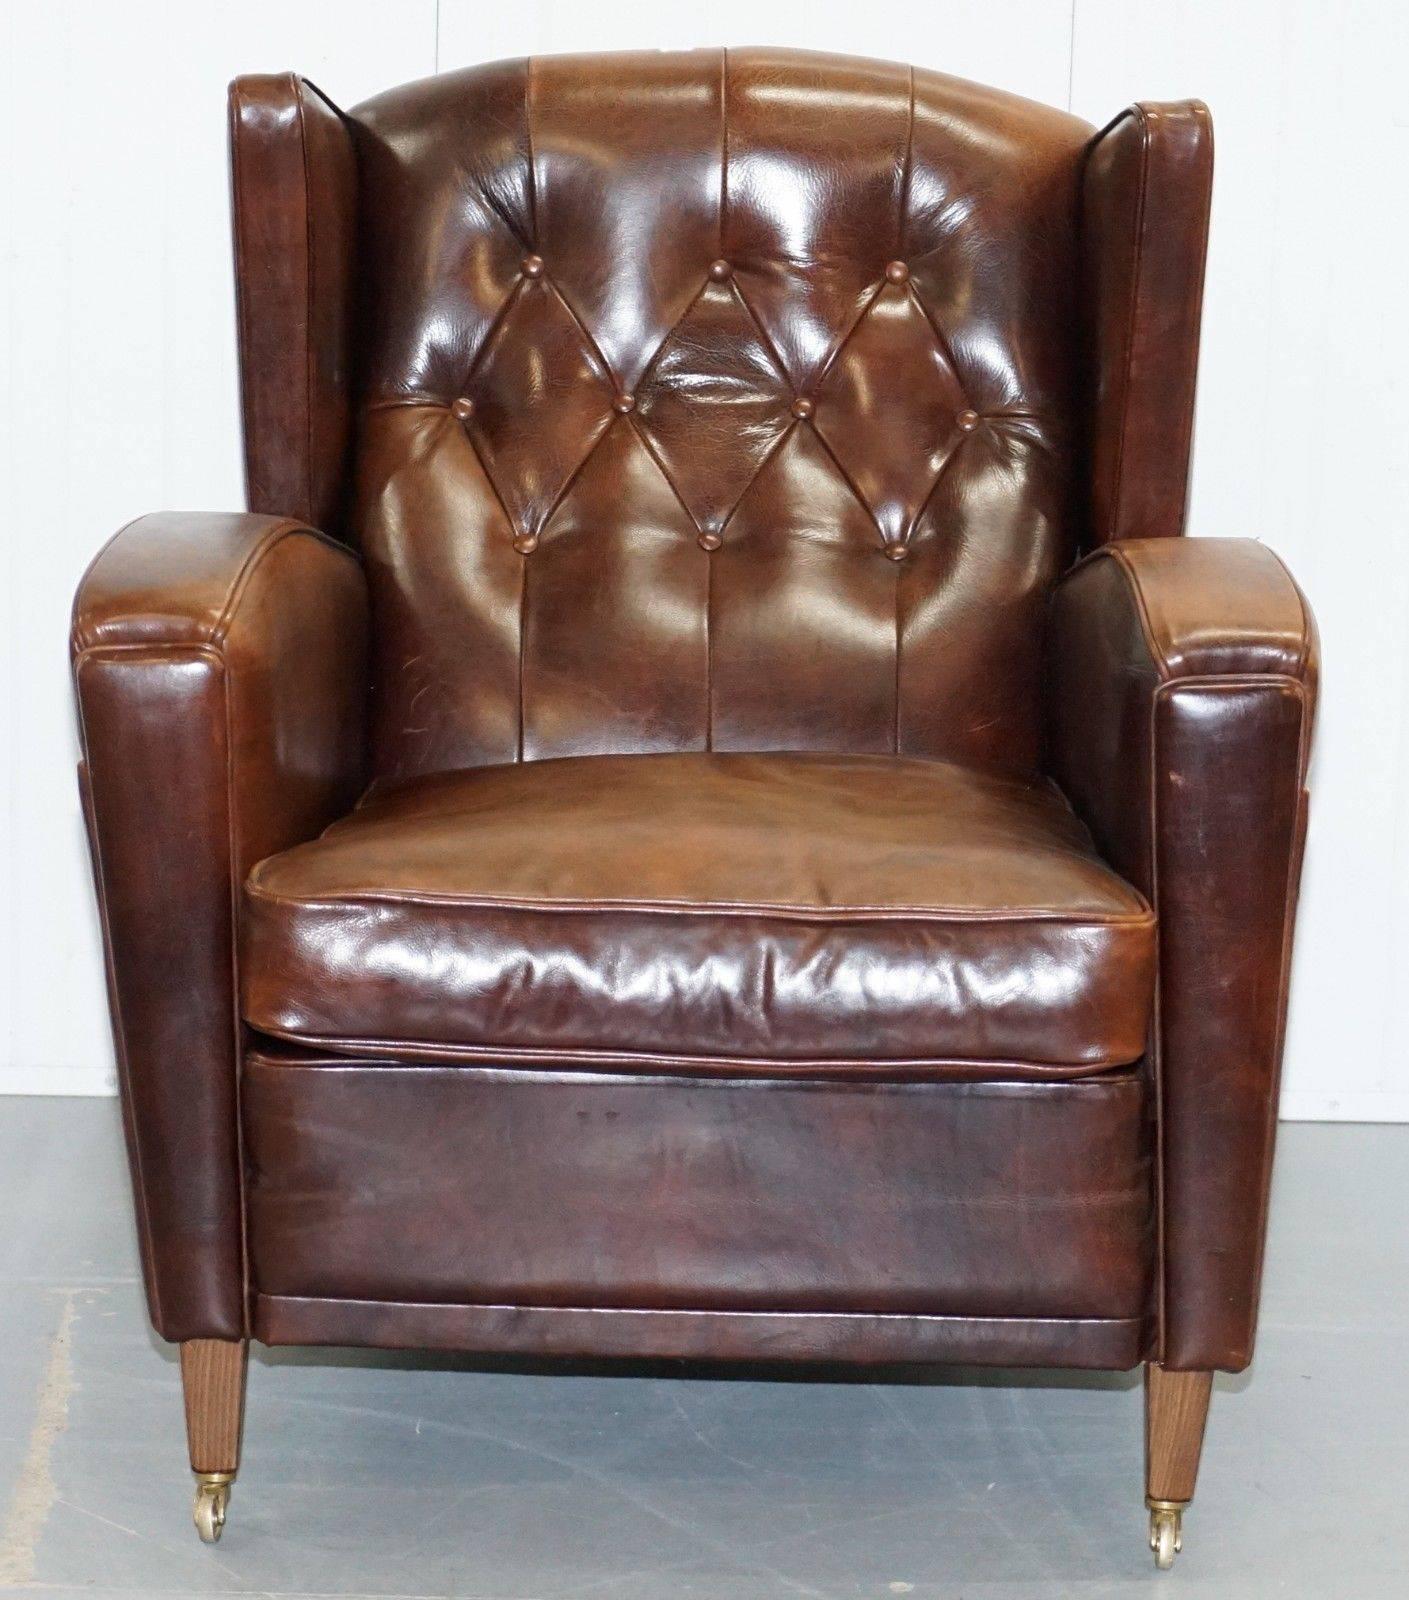 We are delighted to offer for sale this stunning handmade in Holland buffalo leather club armchair with Tuscan feather filled cushion

A very good looking, well made and comfortable armchair in lovely vintage condition throughout, the leather is